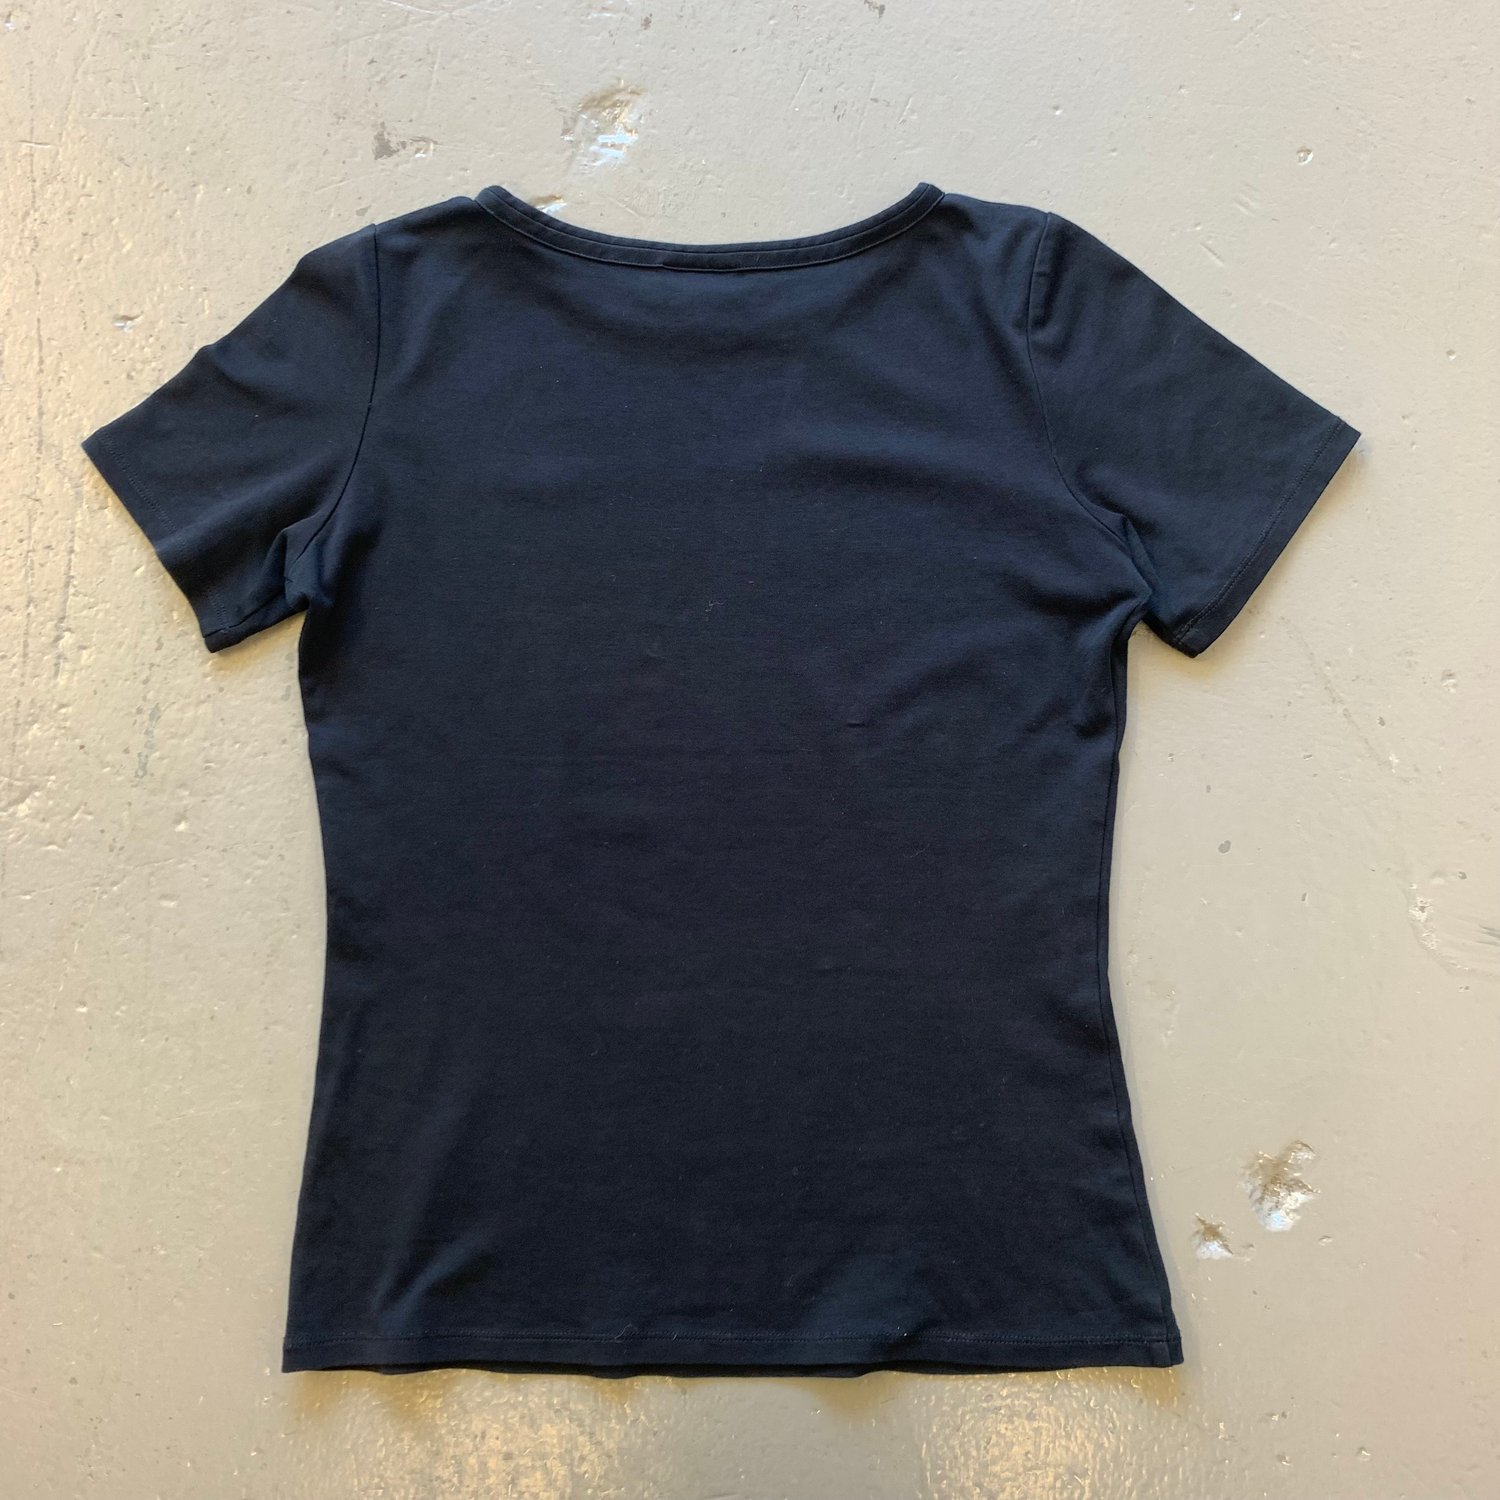 Image of Vintage Chanel T-shirt size small 